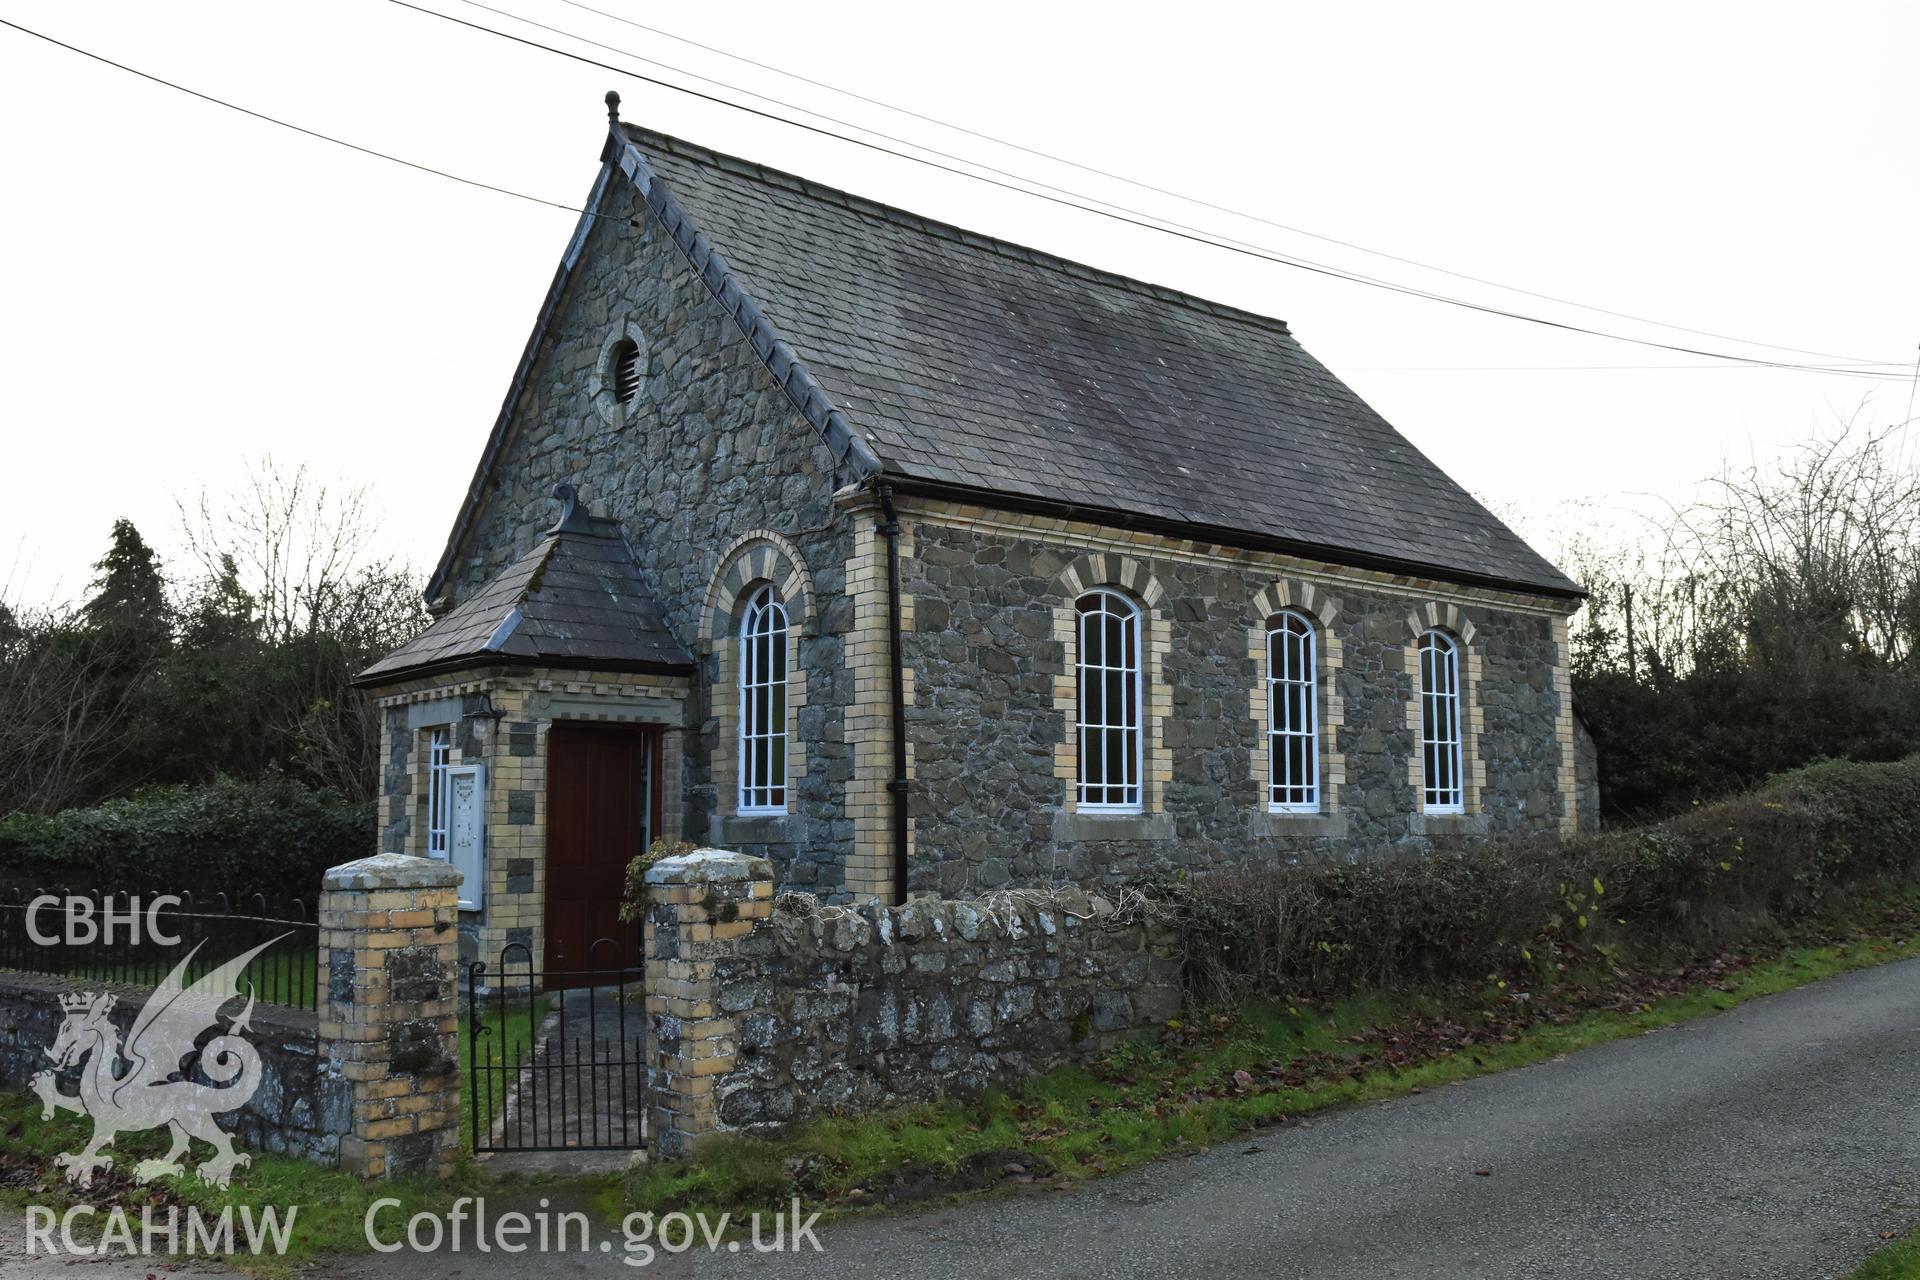 View from the north showing exterior side elevation of Hyssington Primitive Methodist Chapel, Hyssington, Churchstoke, including the front gable and entrance. Photographic survey conducted by Sue Fielding on 7th December 2018.